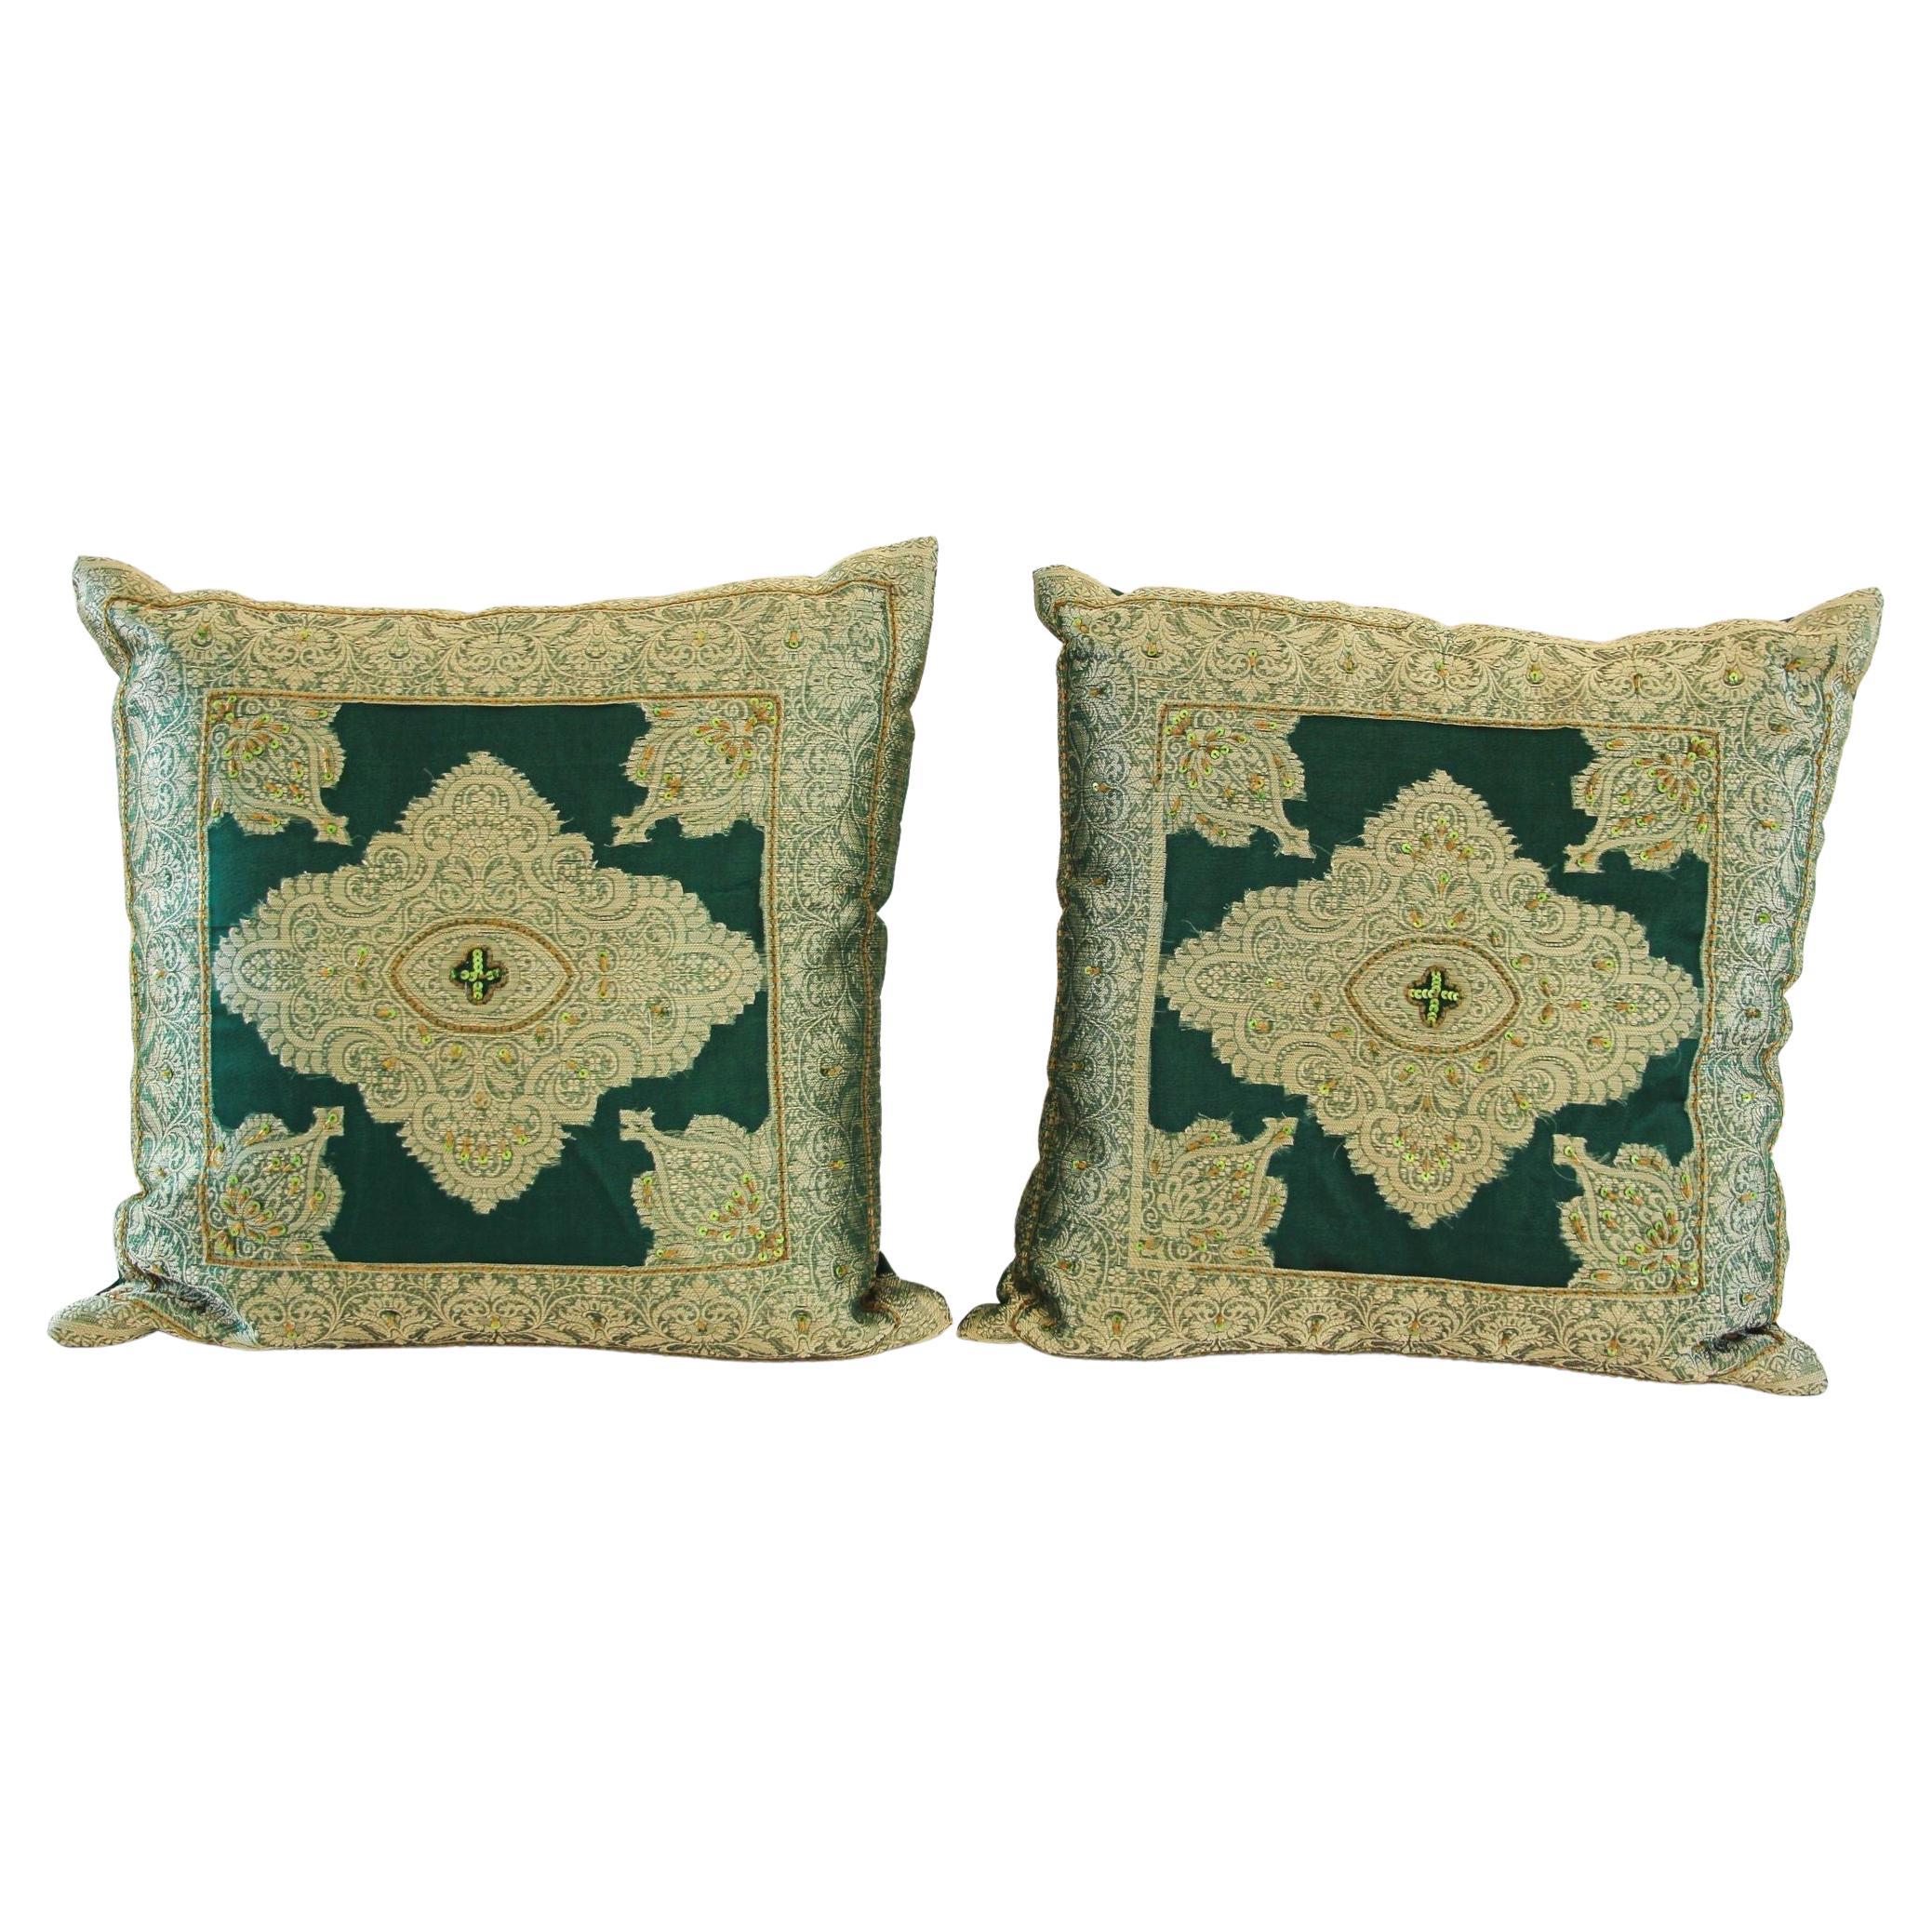 Emerald Green Moorish Throw Pillows Embellished with Sequins and Beads a Pair